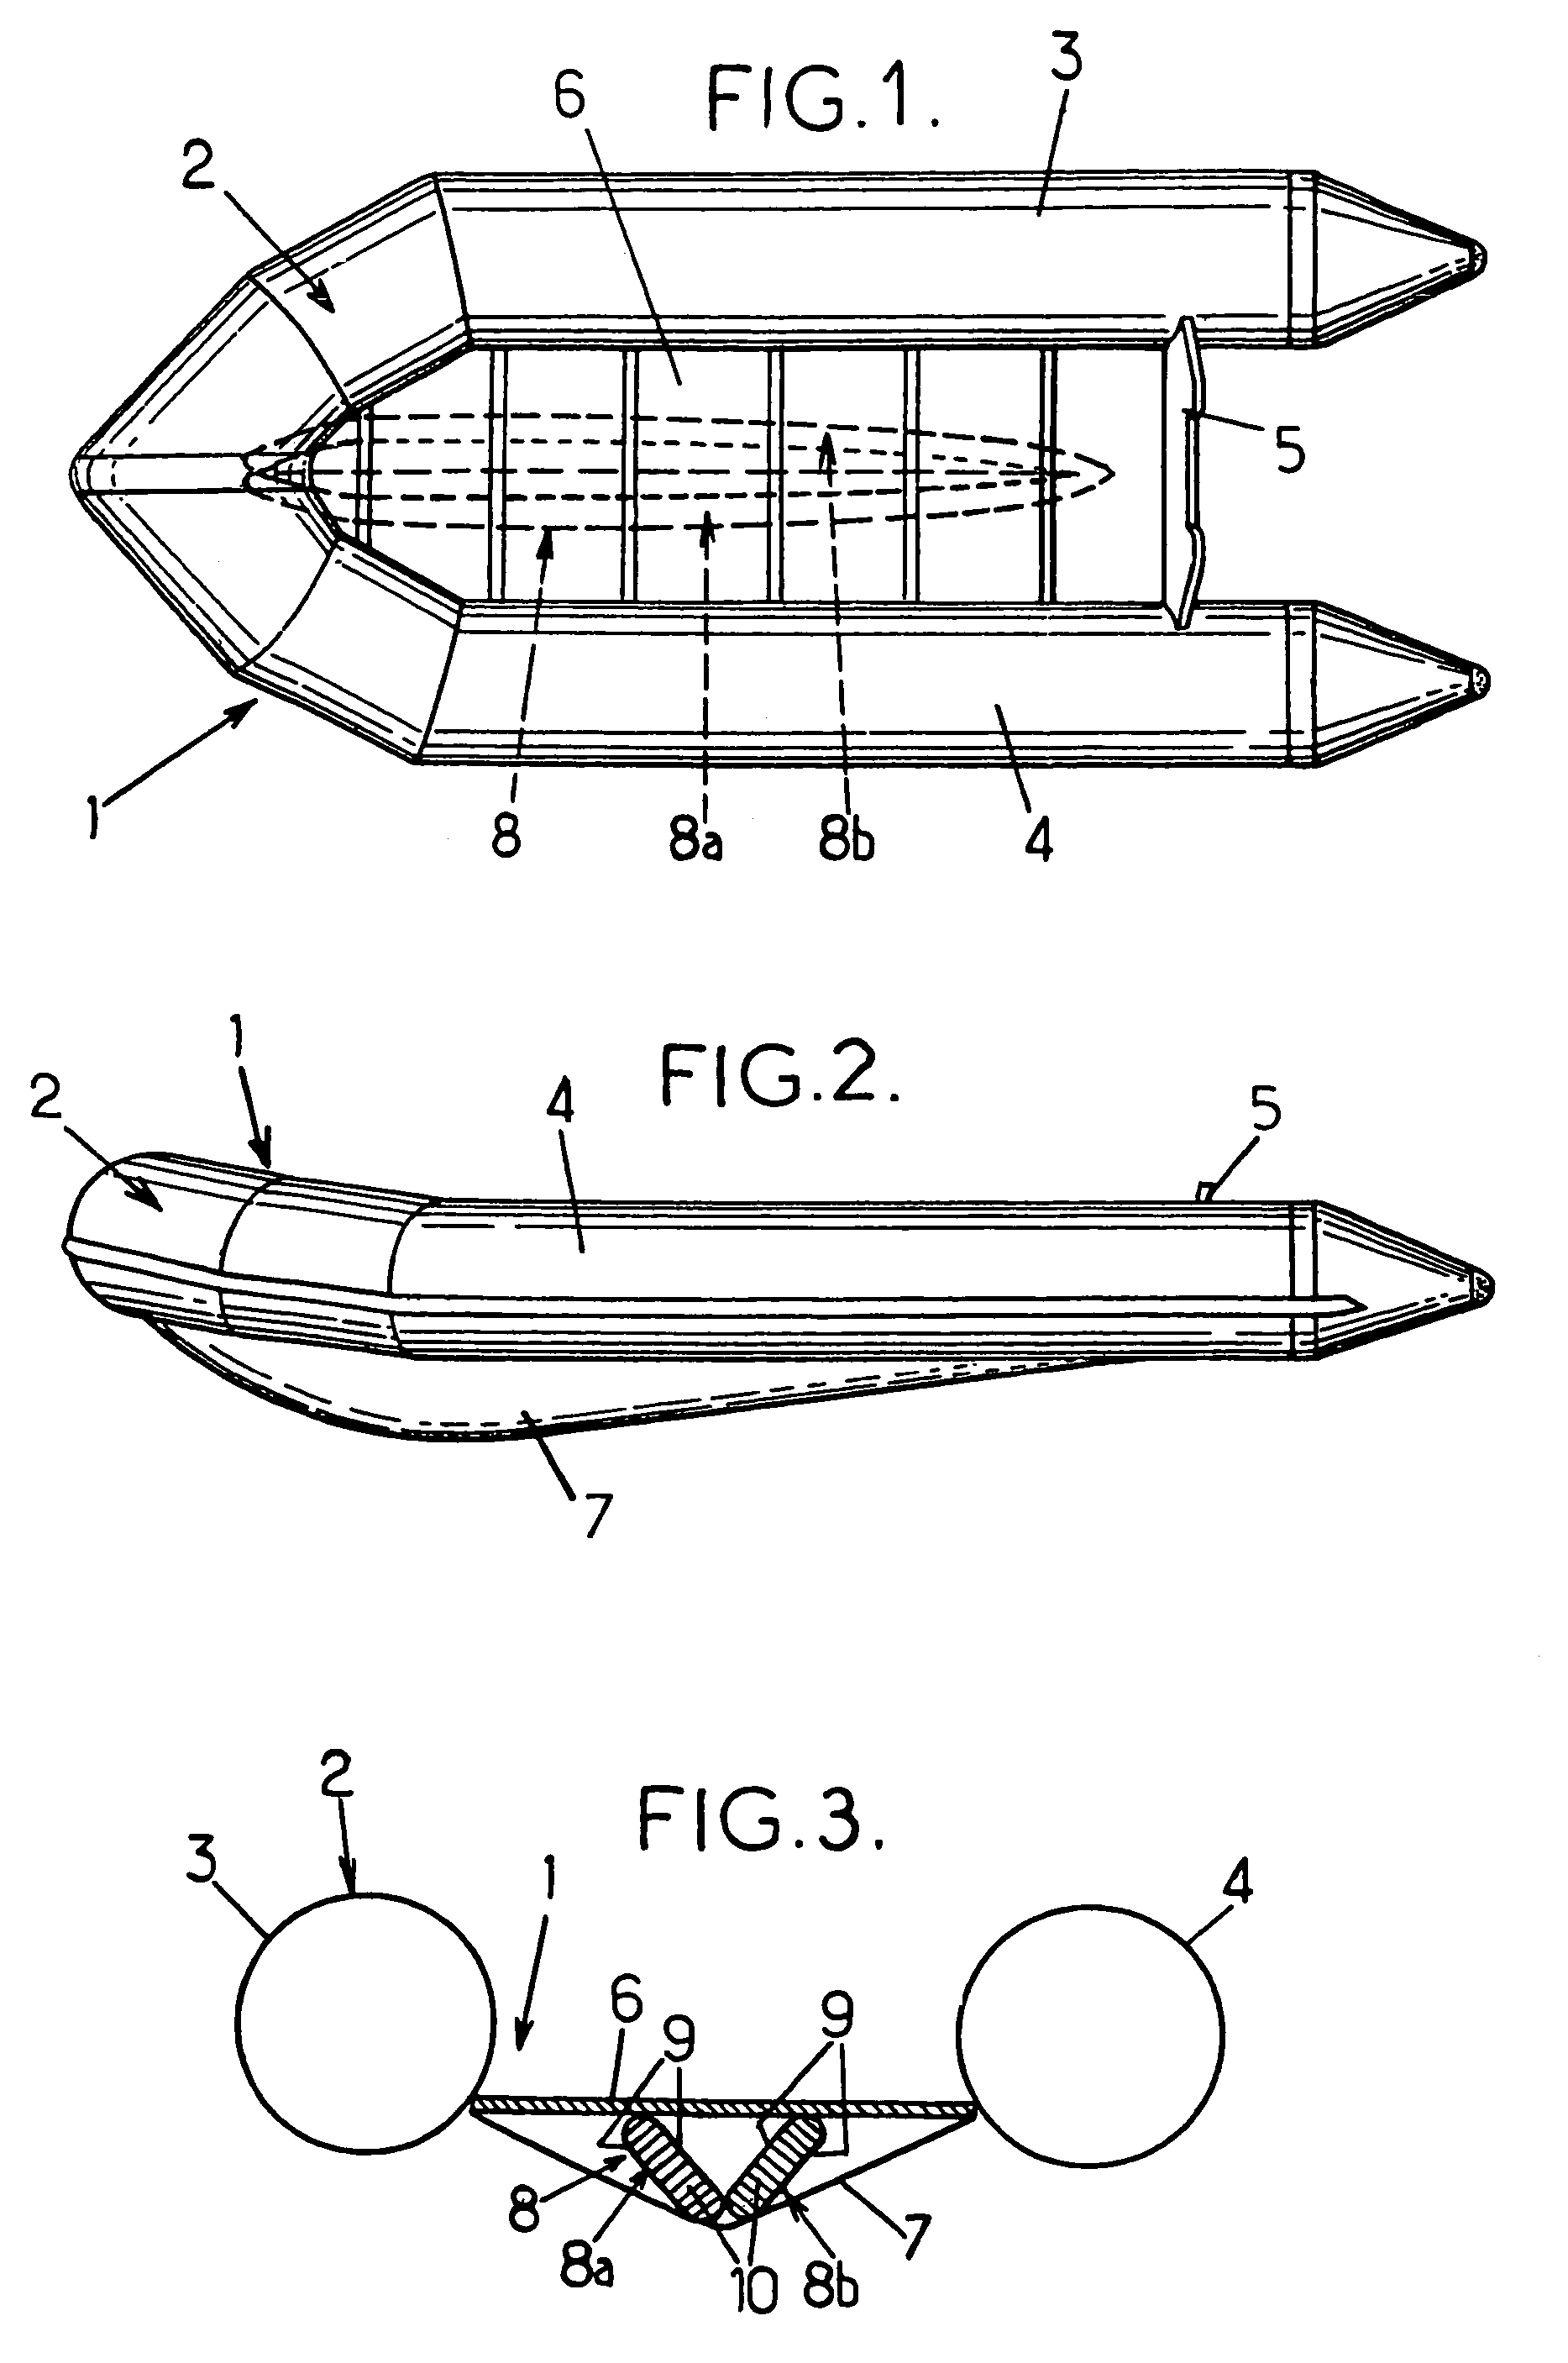 Inflatable boat with a high pressure inflatable keel